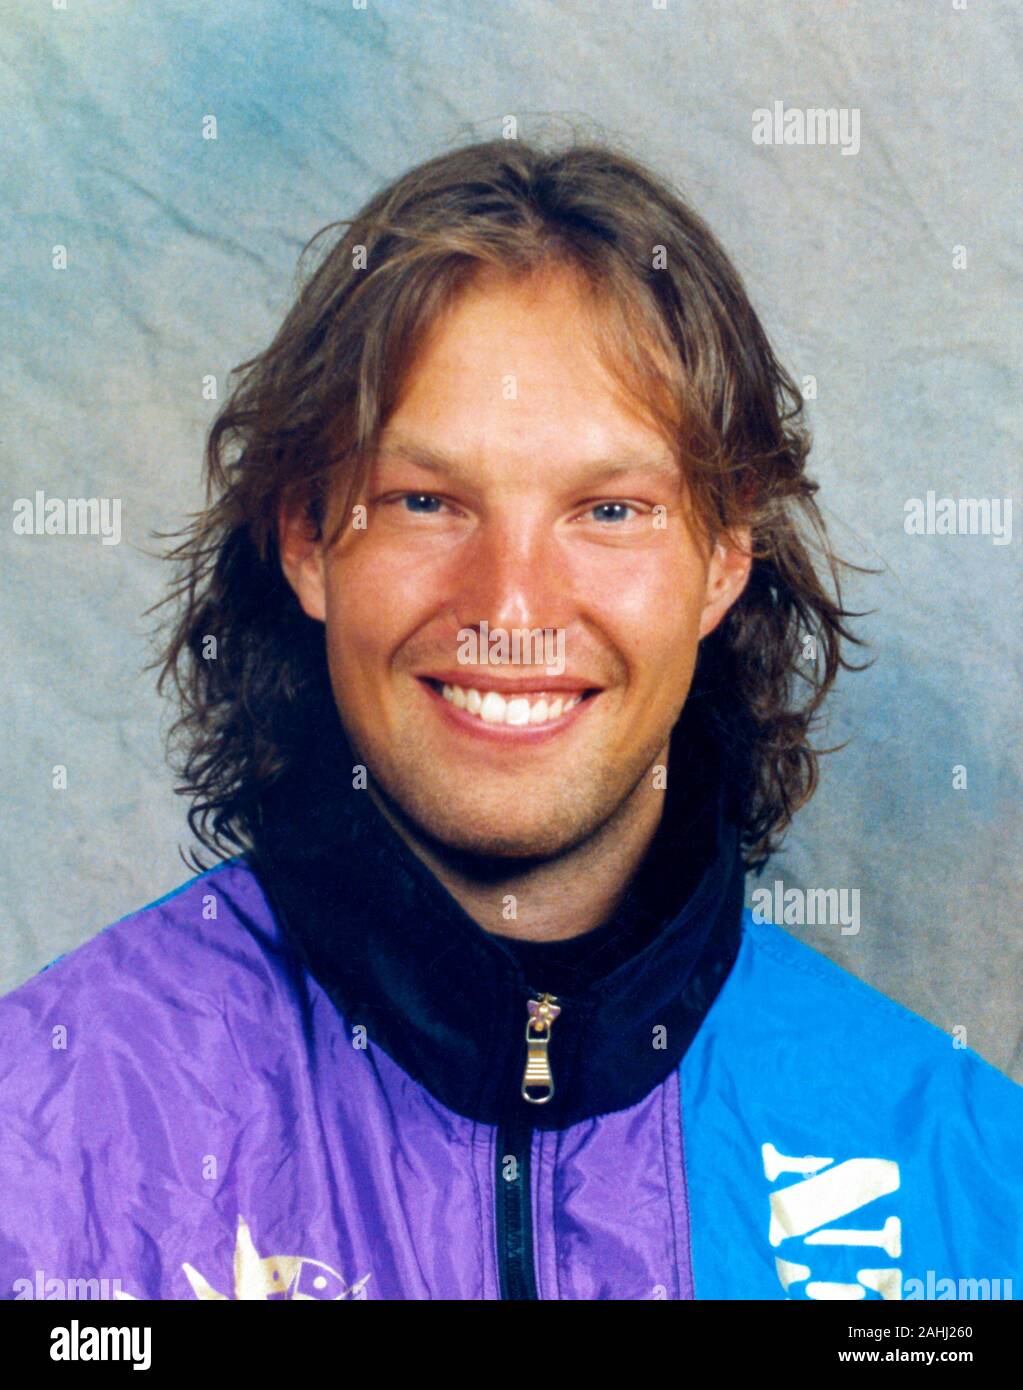 THOMAS FOGDÖ Former Swedish alpine skier after an accident hed breaking his spine and became disable.Today he works with Swedish Ski Federation Stock Photo